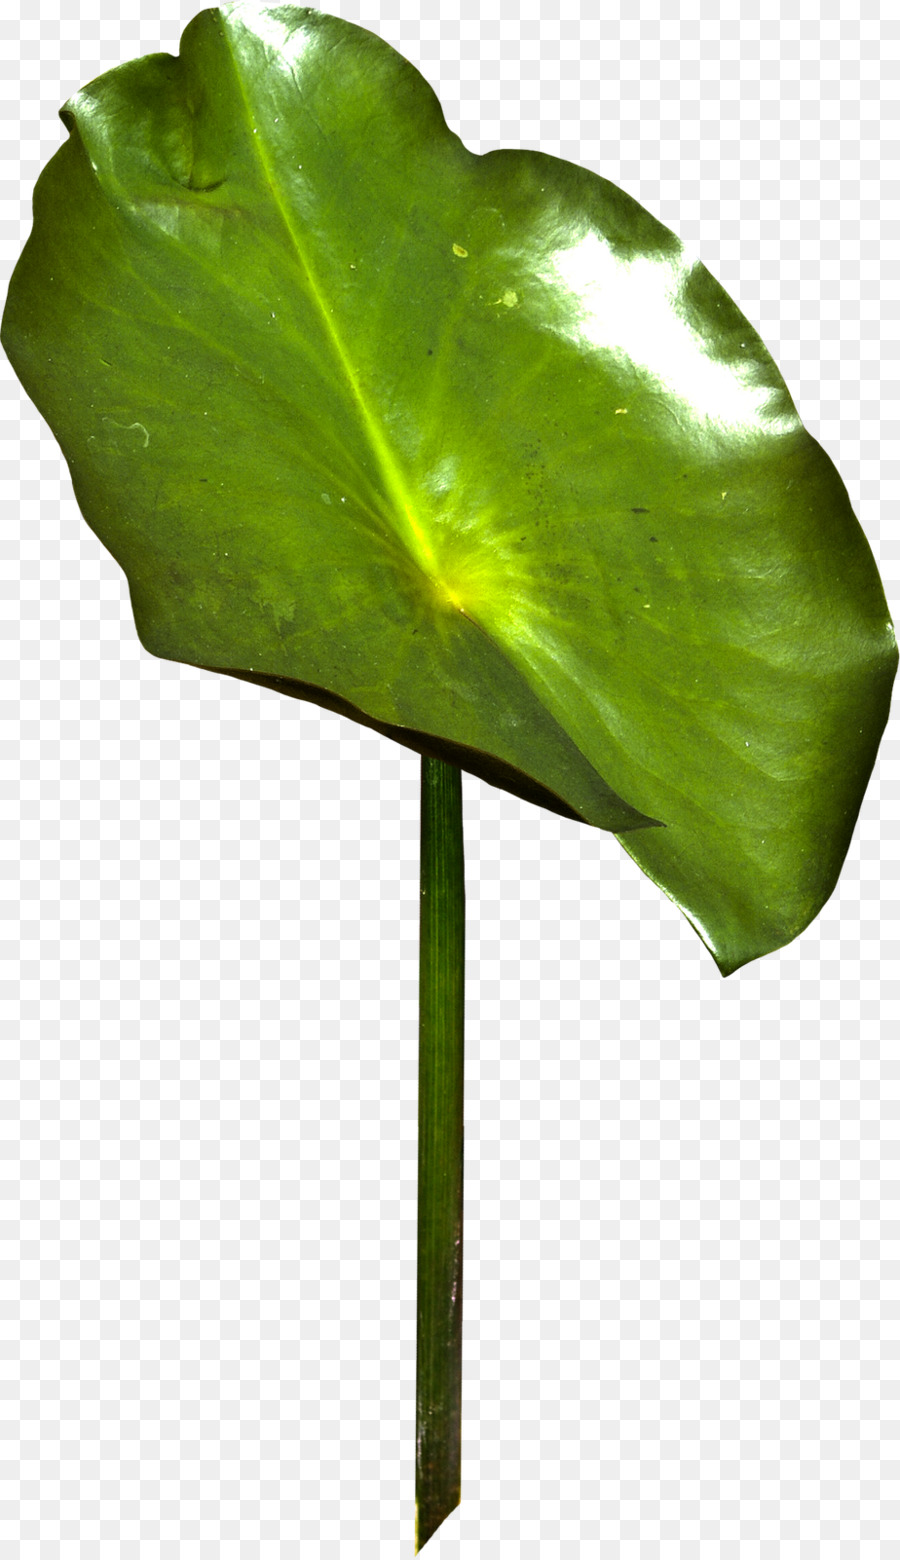 Feuille，Automne PNG